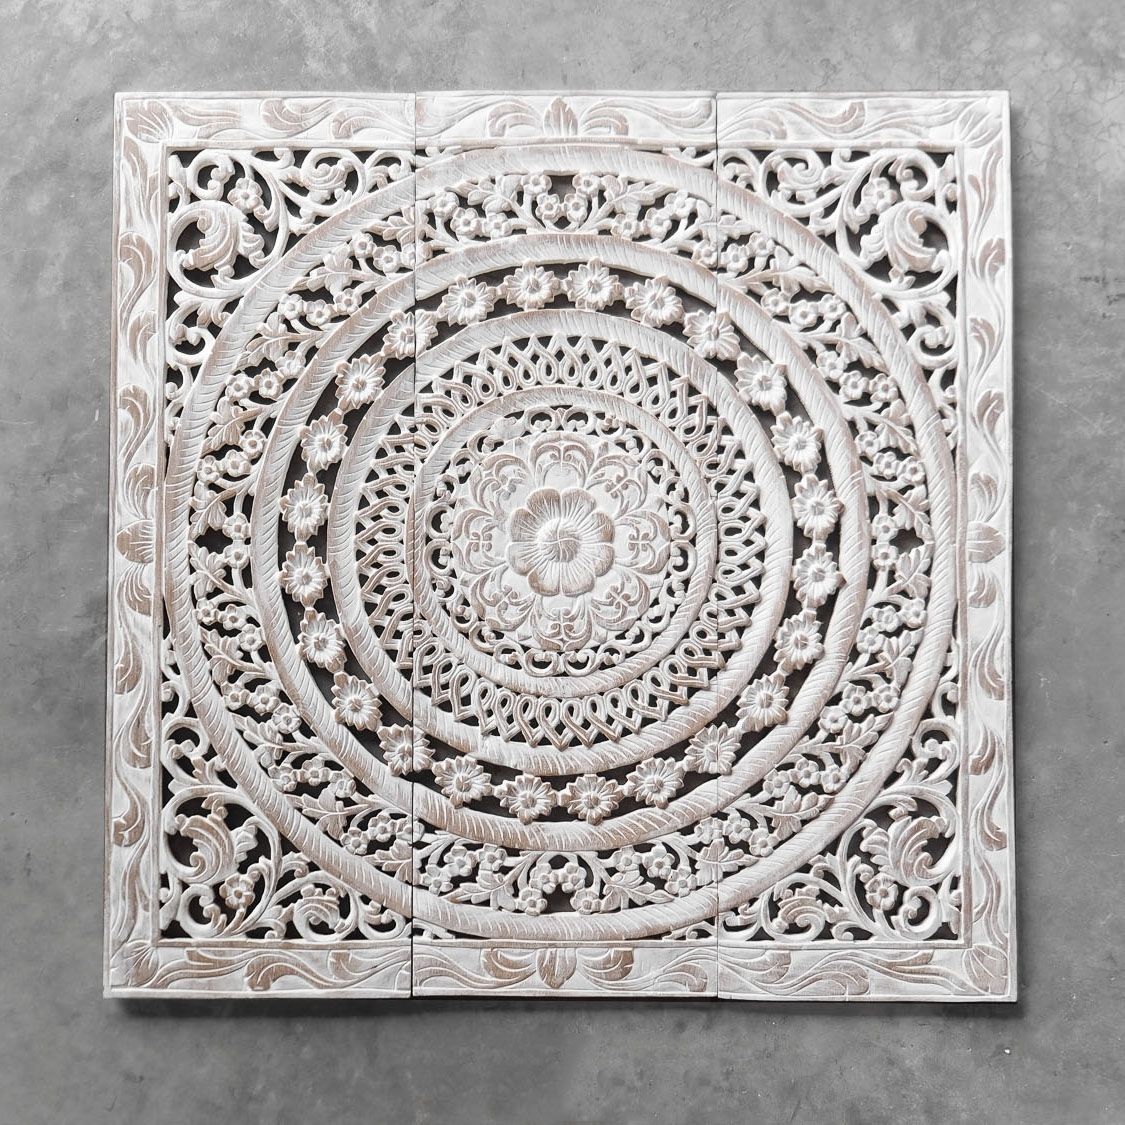 Carved Wood Wall Art Panels Buy Moroccan Decent Wood Carving Wall With Regard To Carved Wood Wall Art (Photo 1 of 20)